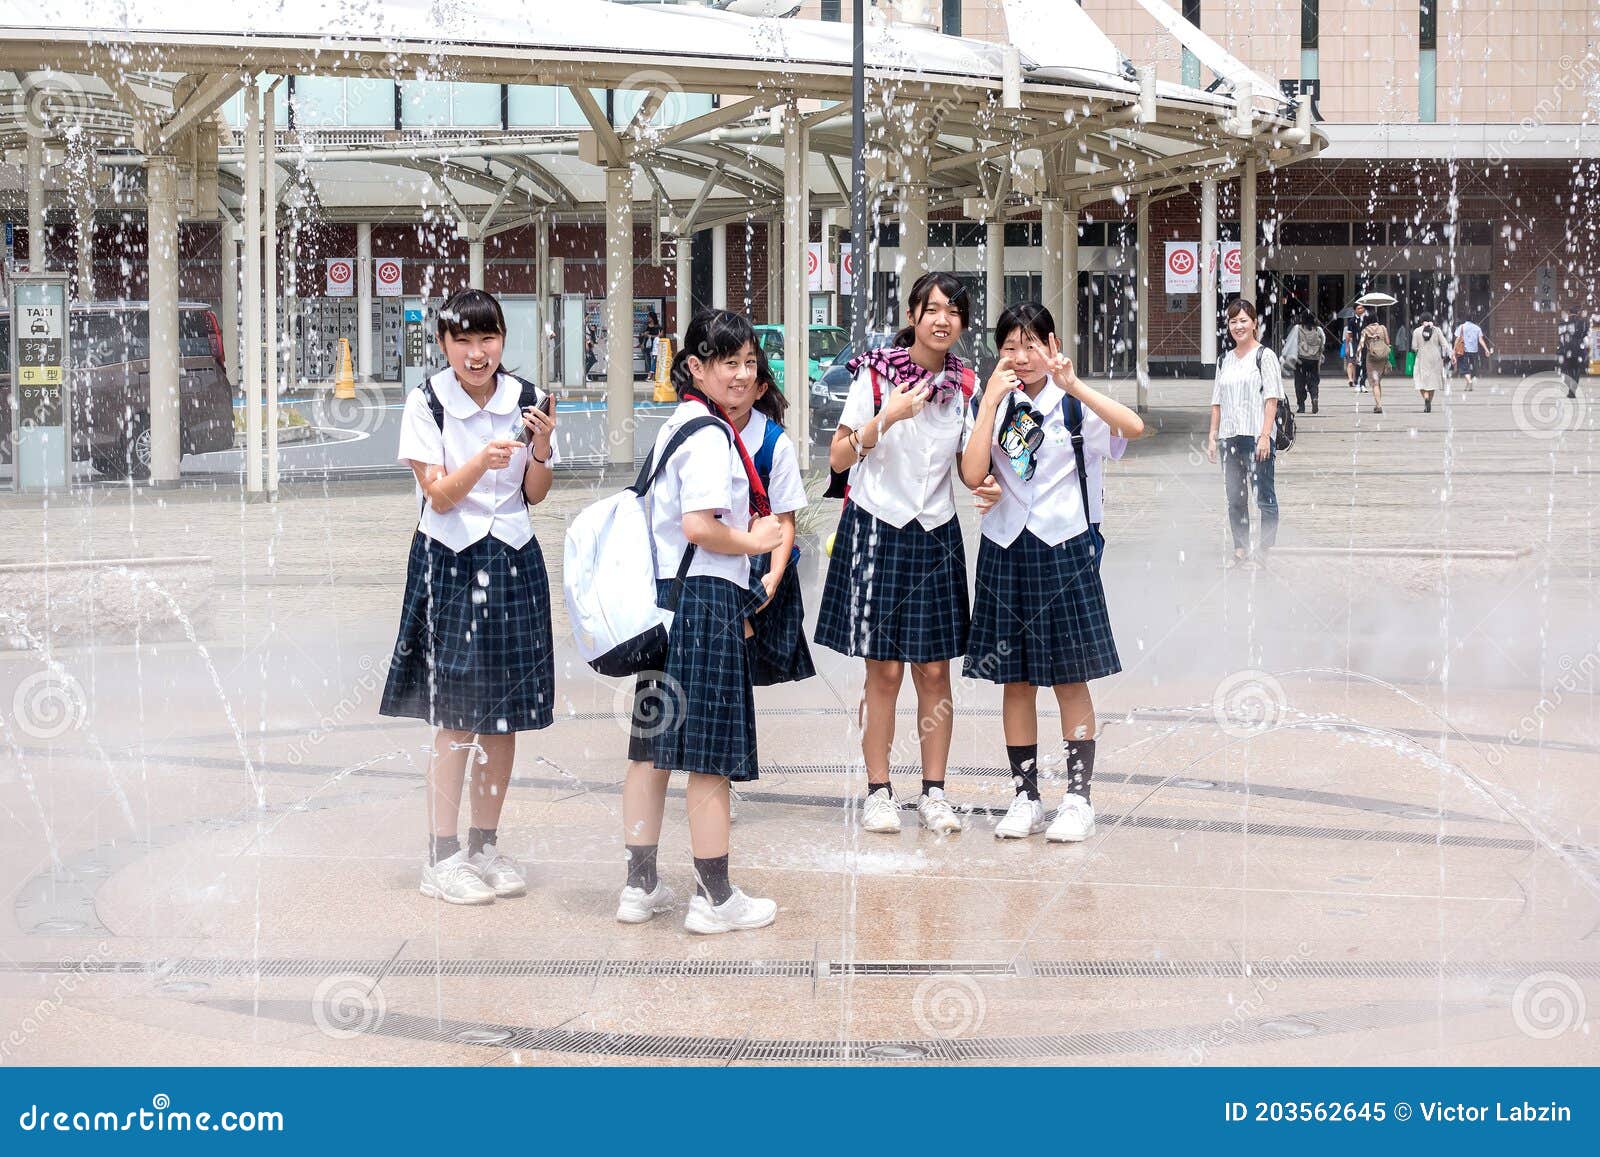 172 Japanese Schoolgirls Photos Free Royalty Free Stock Photos From Dreamstime